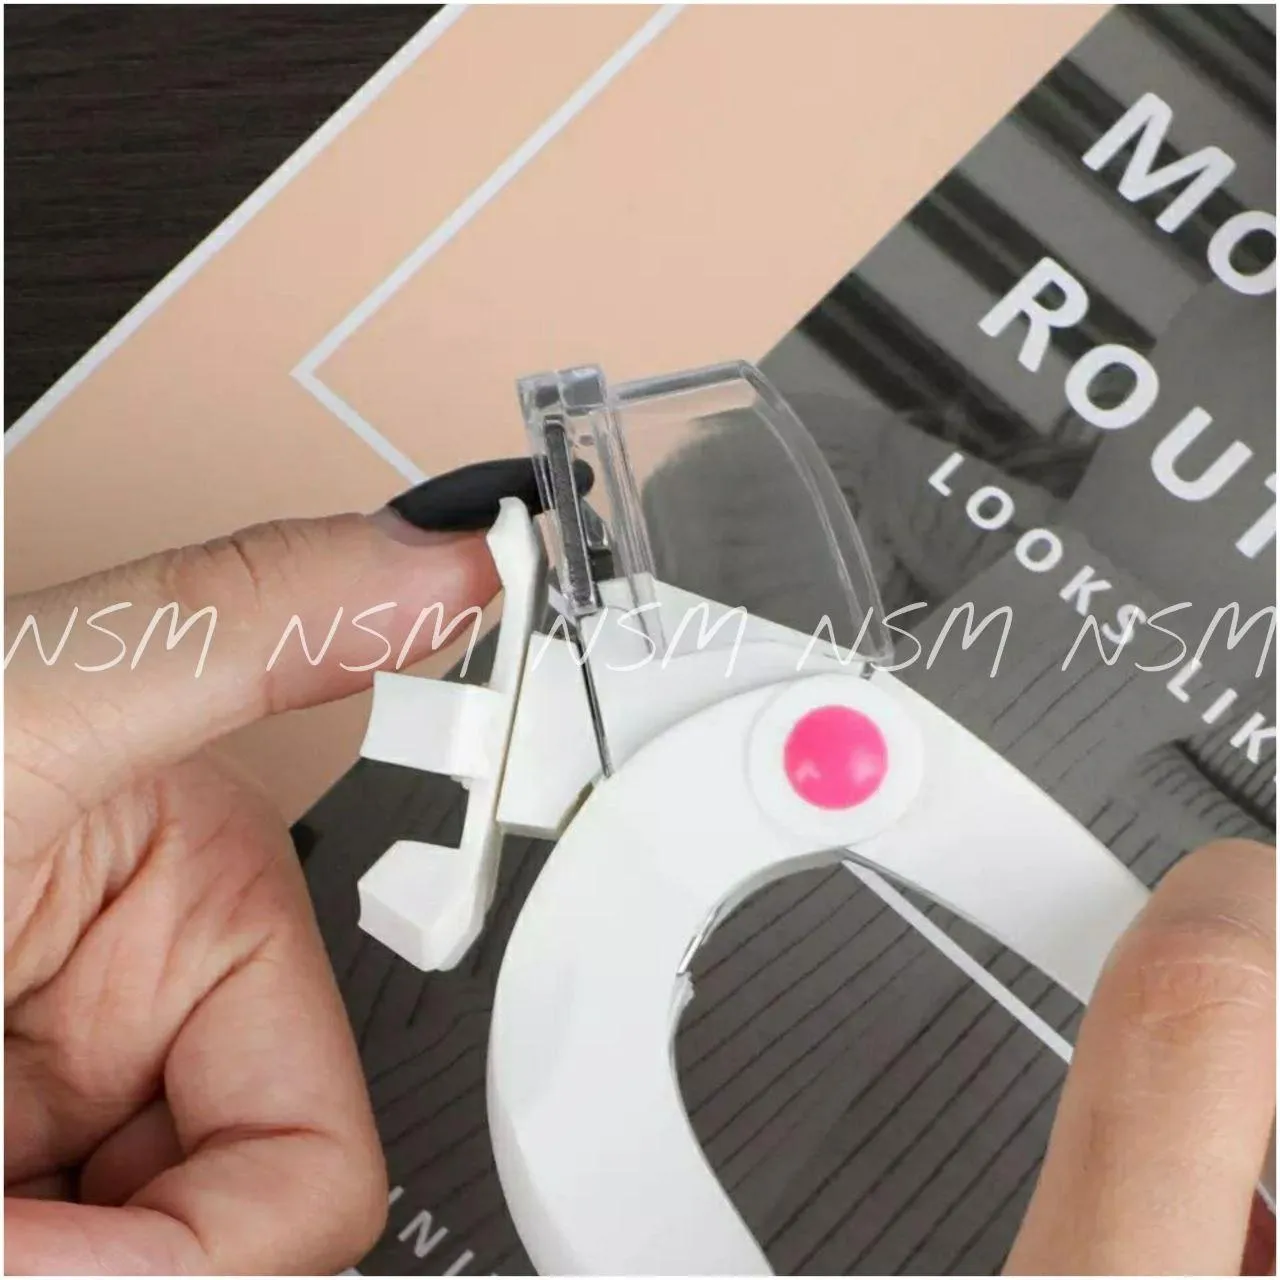 Best Nail Clipper For Acrylic Nails - INSTUMAX®